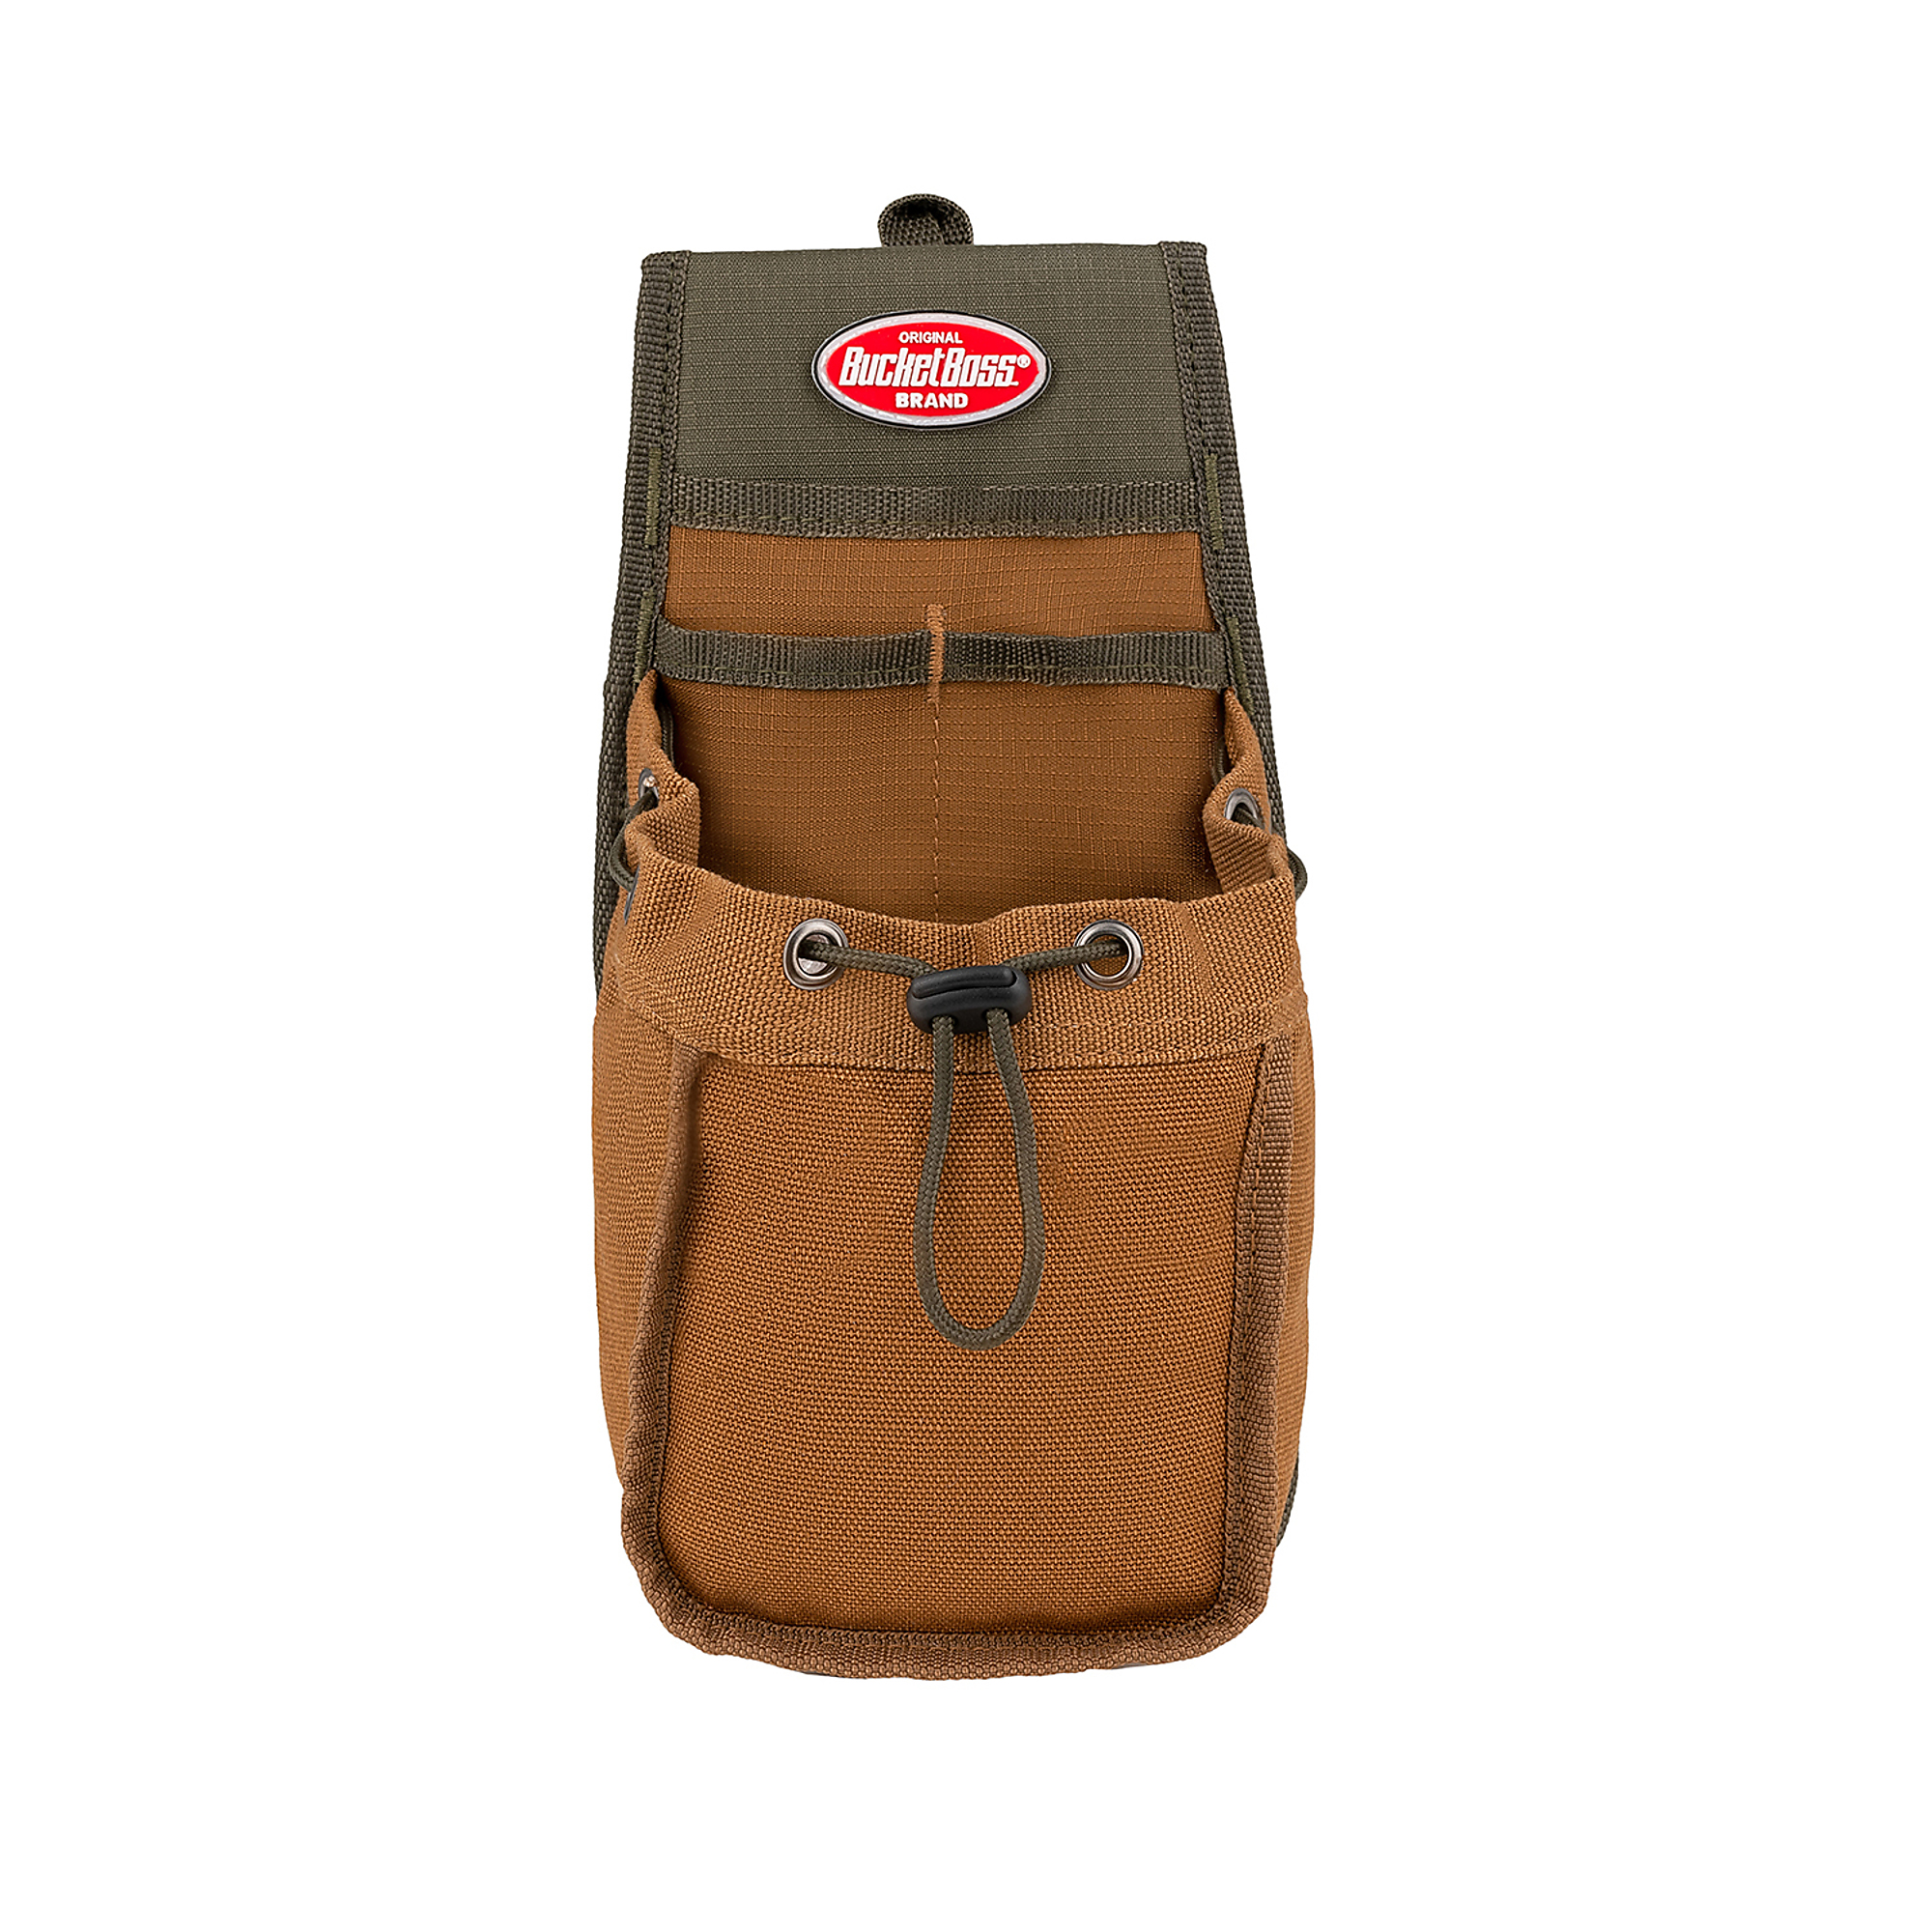 Bucket Boss, 4 Pocket Pouch, Color Brown, Pockets (qty.) 3 Material Canvas, Model 54130